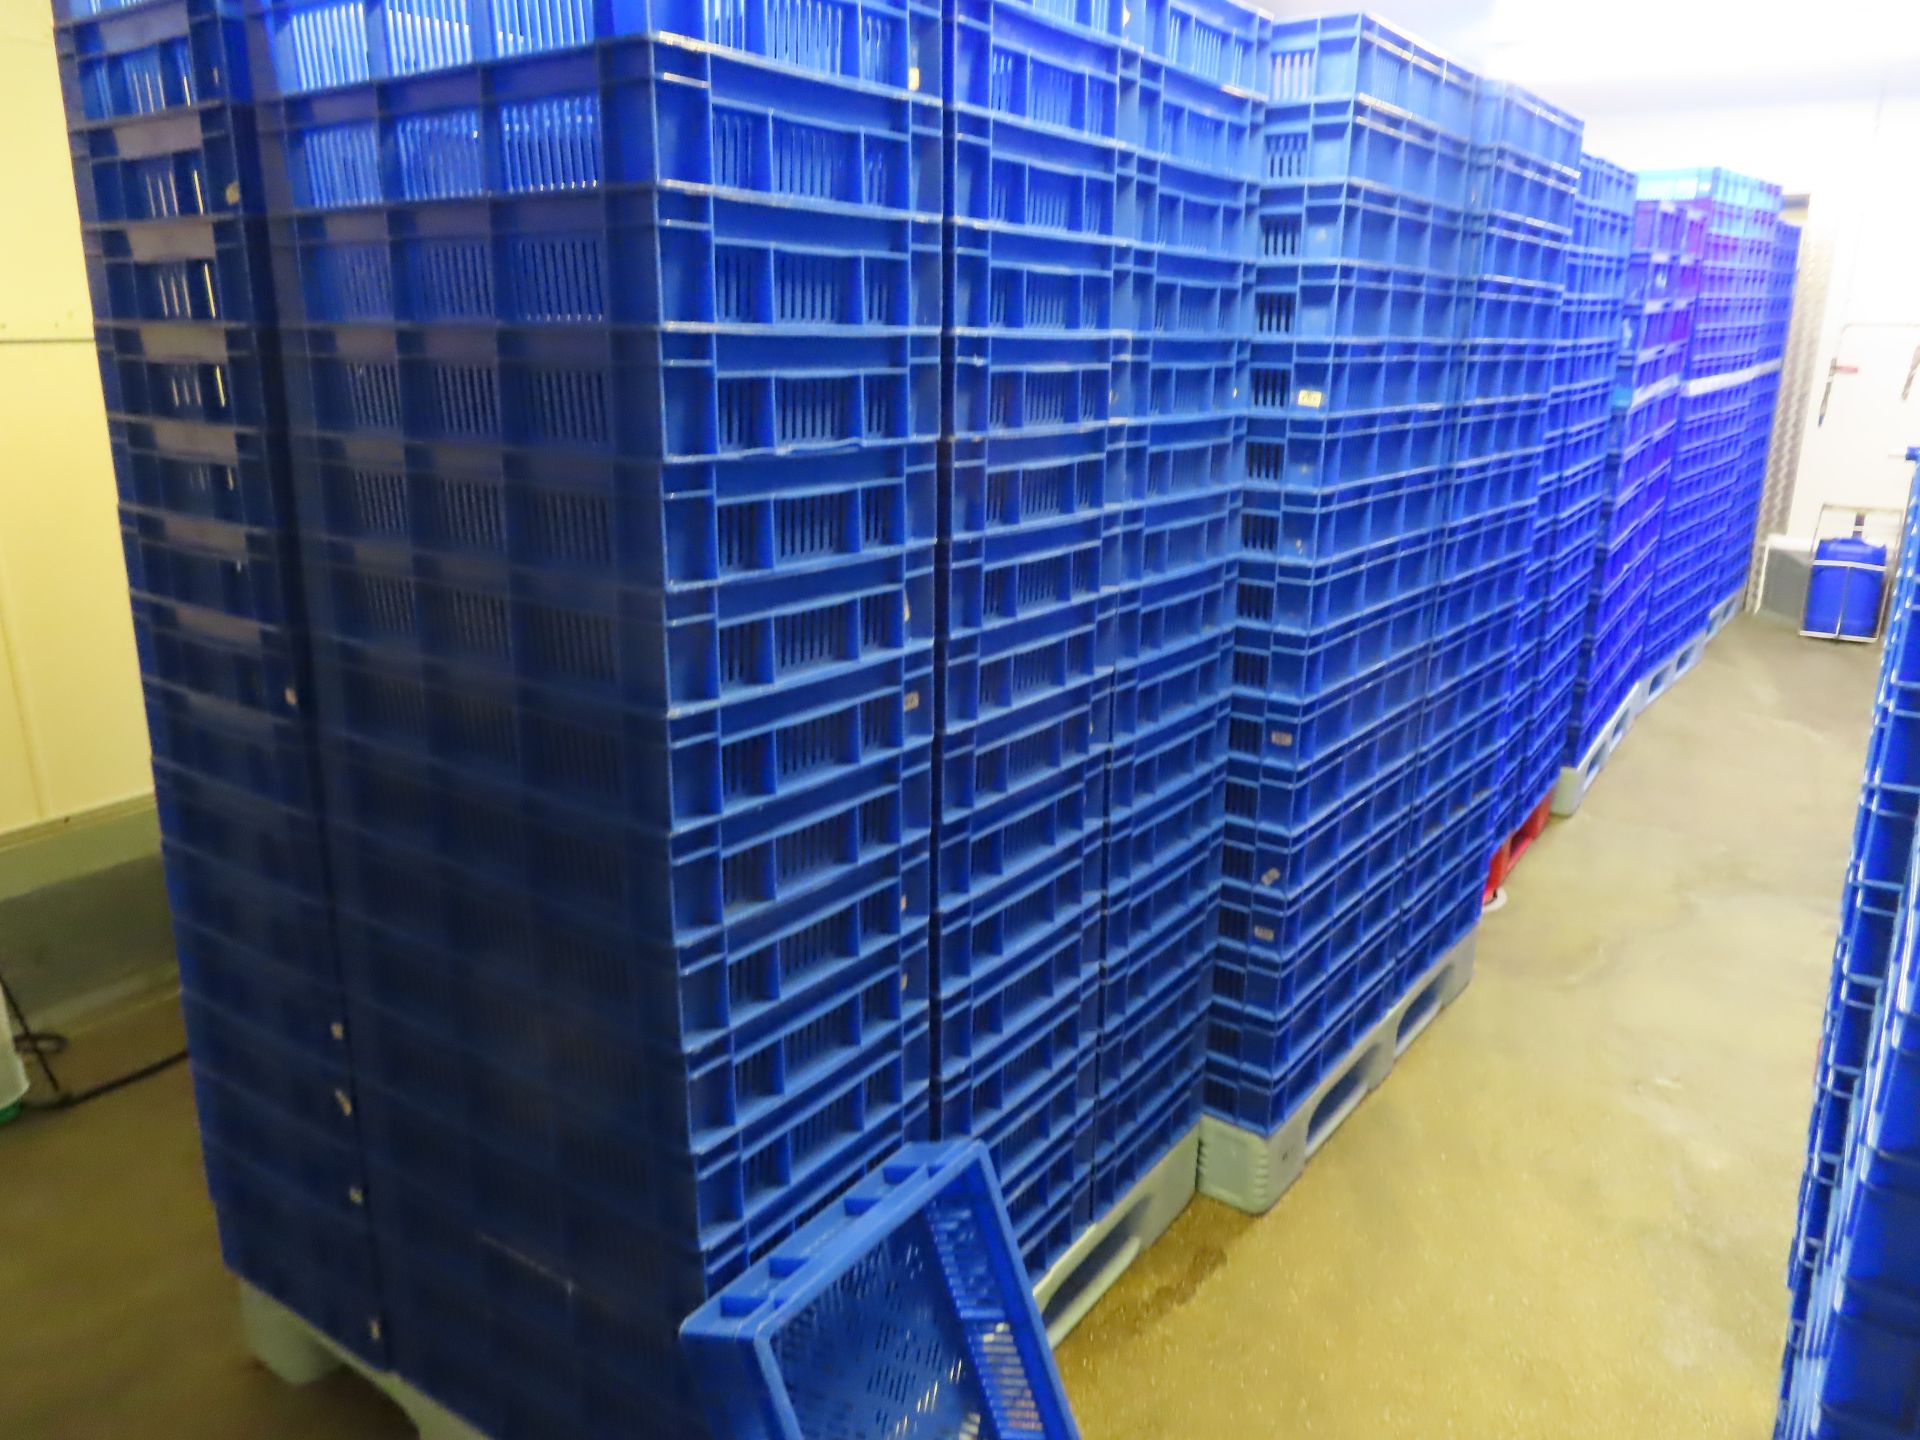 6 X PALLETS OF TRAYS (APPROX. 80 BLUE TRAYS ON EACH PALLET). - Image 3 of 5